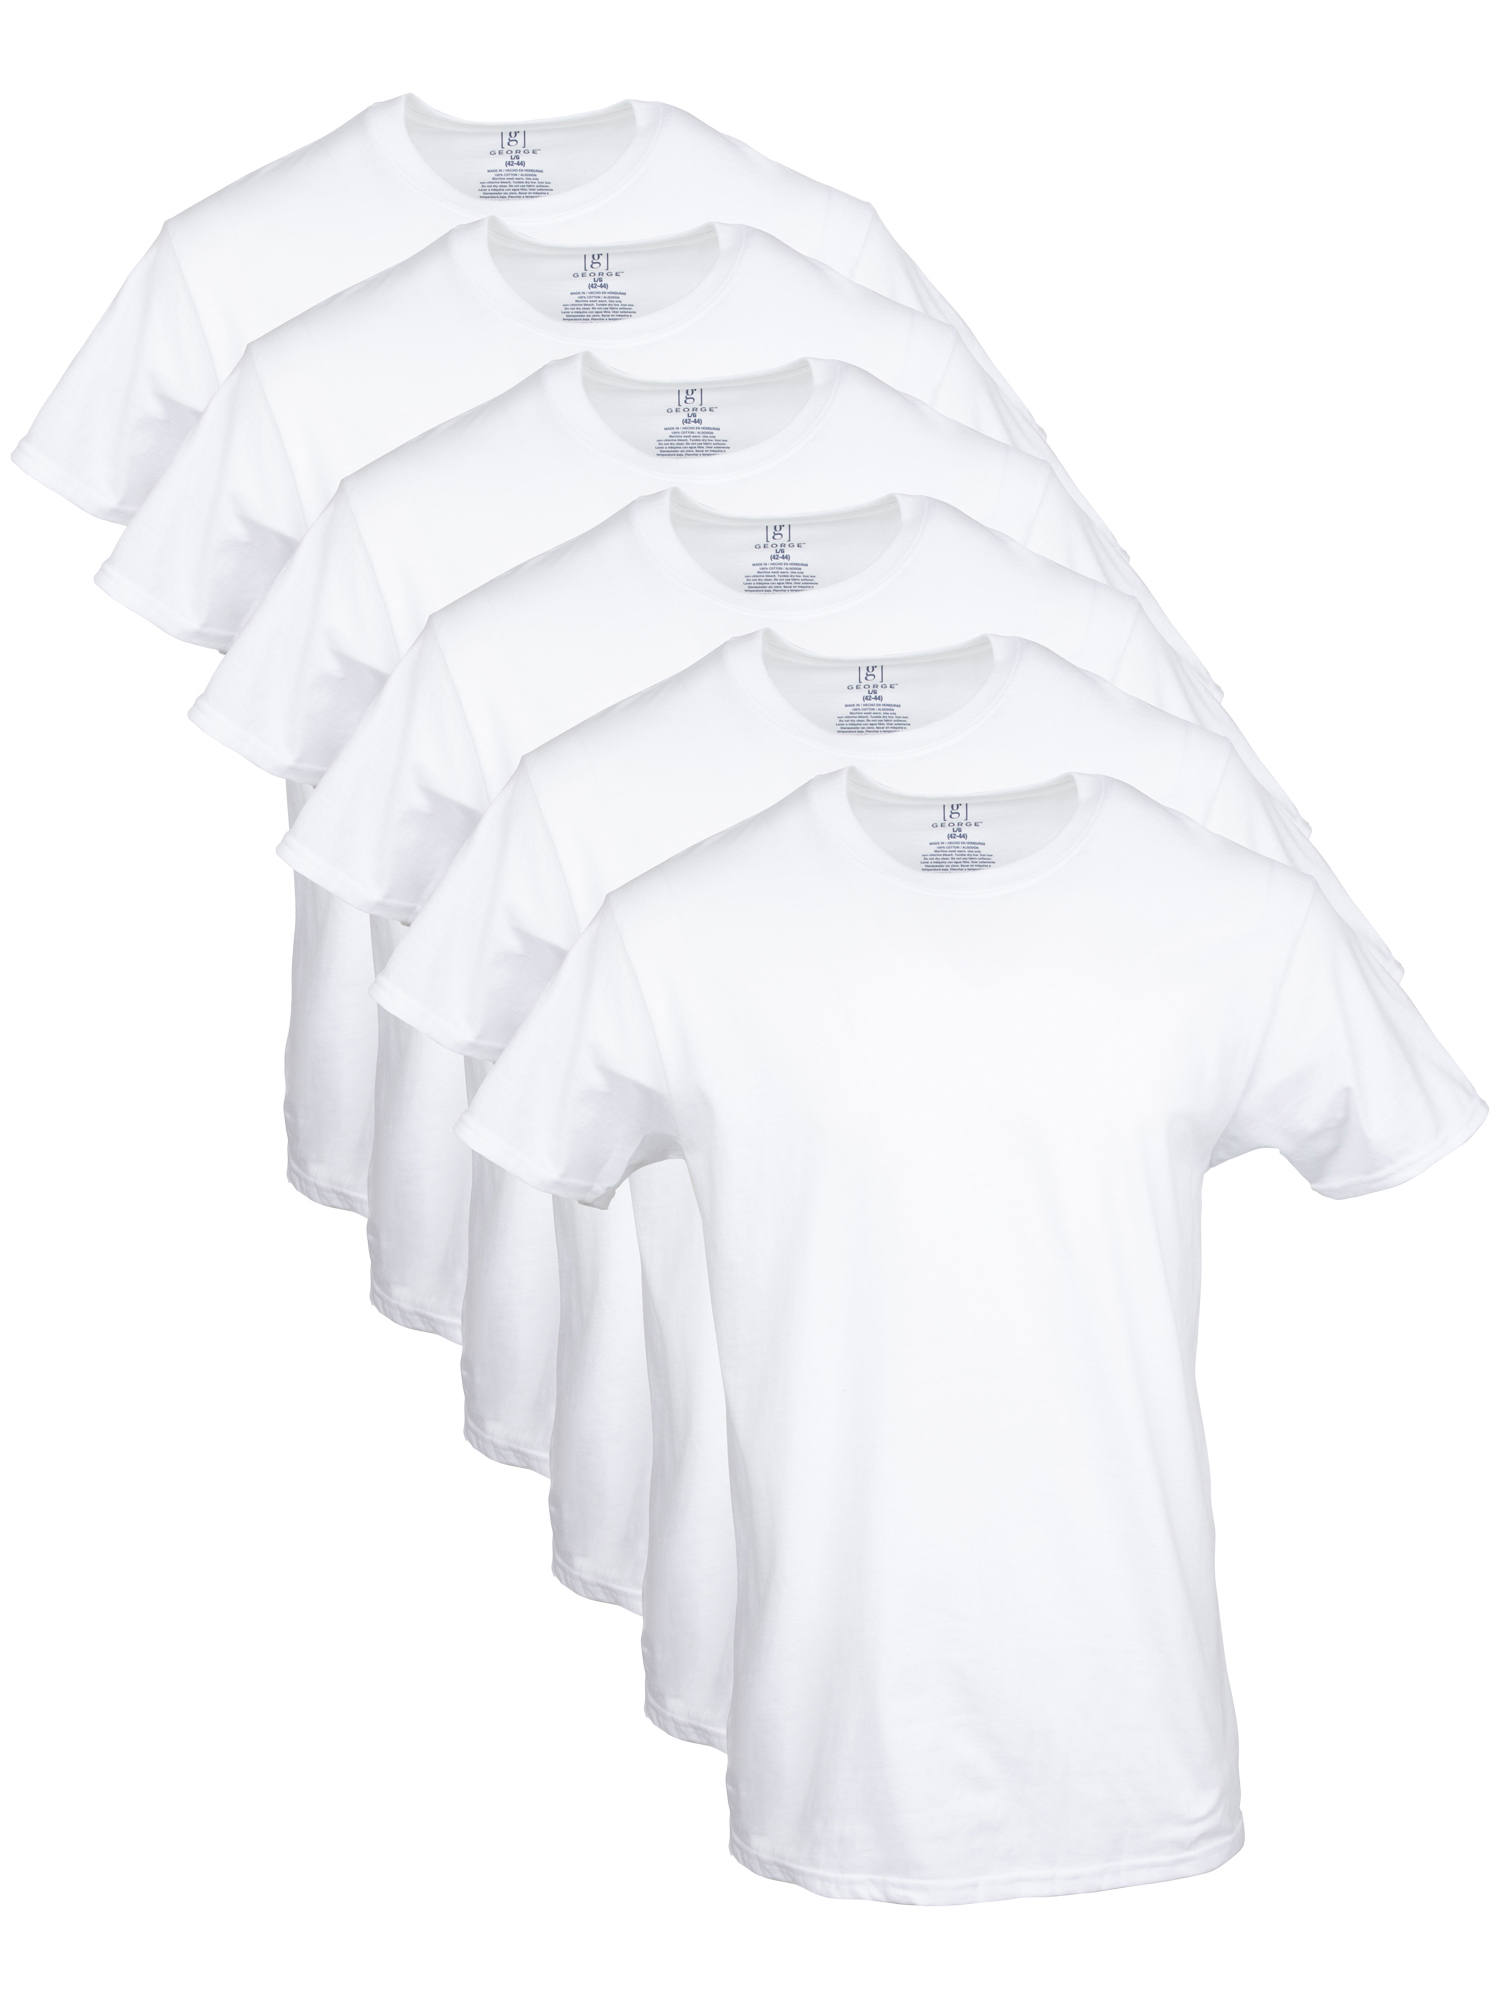 George Men's Crew T-Shirts, 6-Pack - image 1 of 7